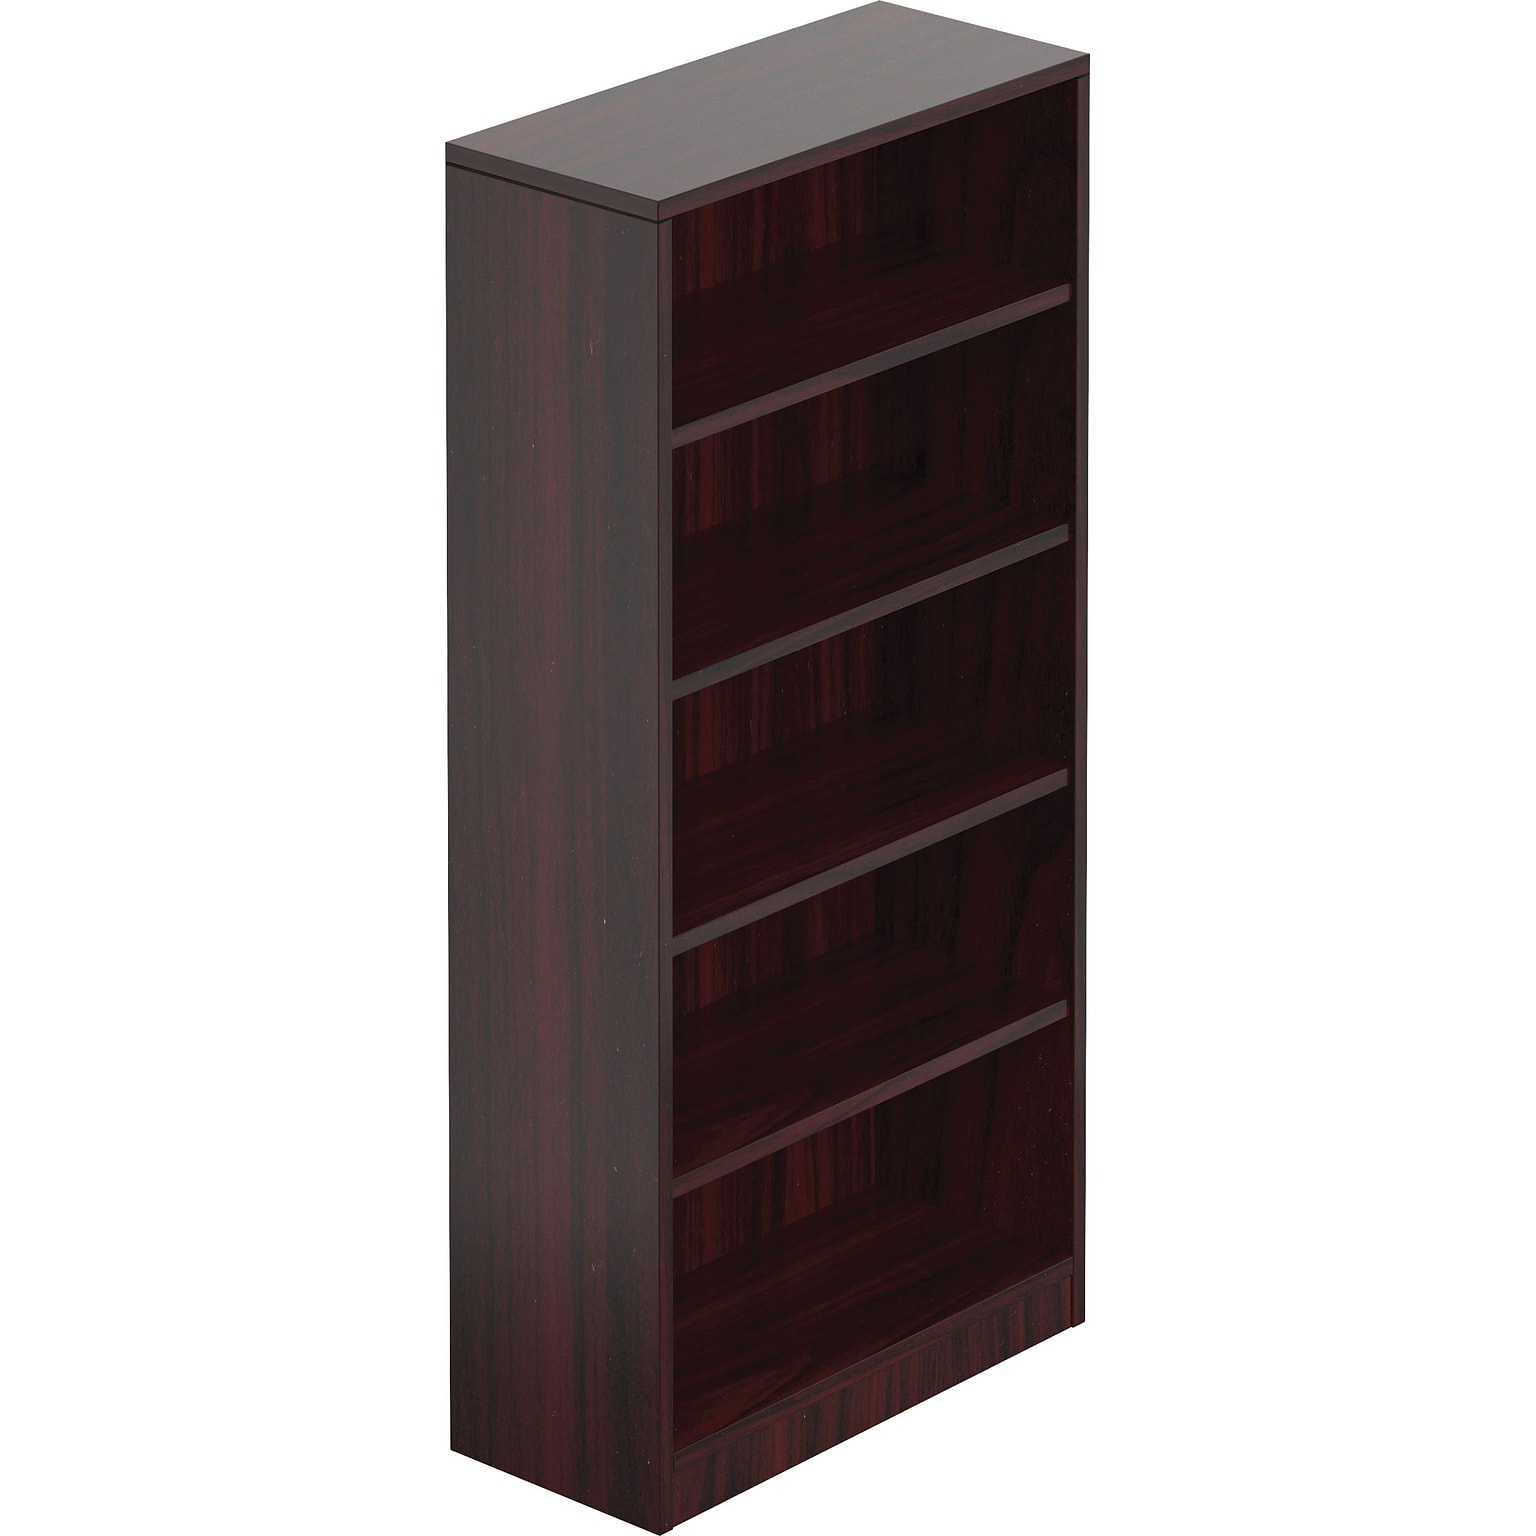 Offices to Go Superior Laminate 71H 4-Shelf Bookcase with Adjustable Shelves, American Mahogany (TDSL71BC-AML)